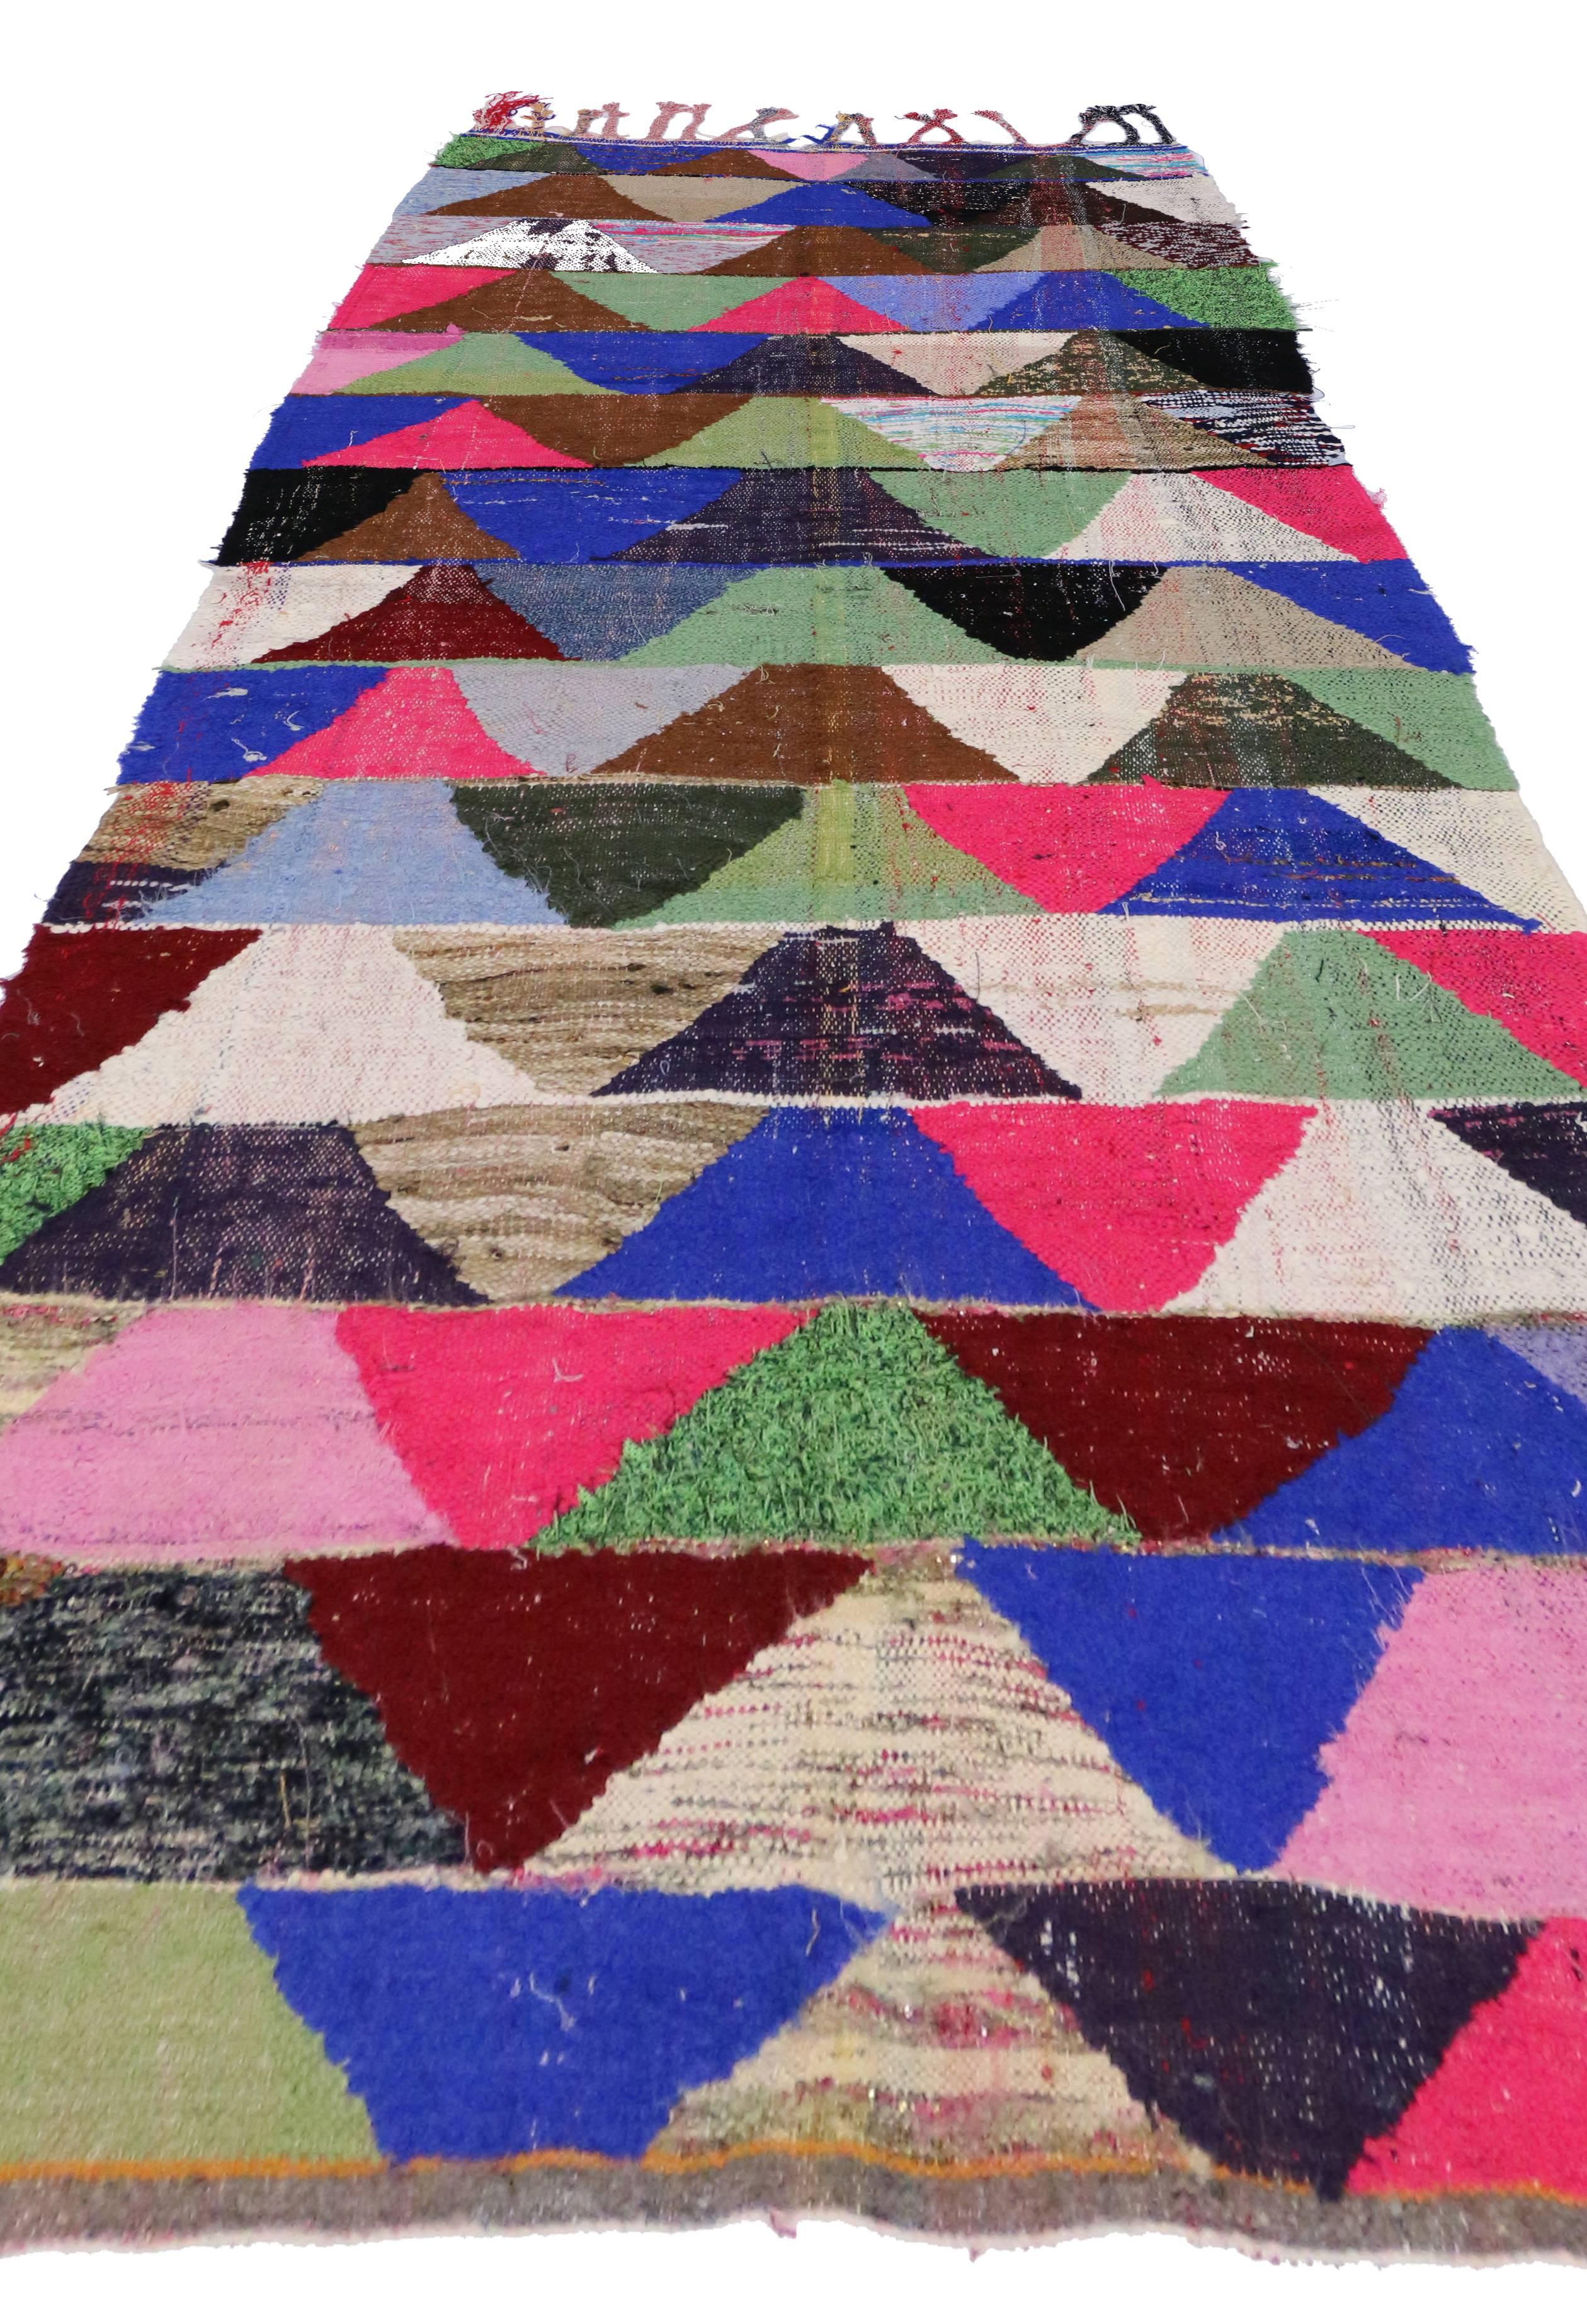 Tribal Vintage Berber Moroccan Rug with Colorful Contemporary Abstract Style